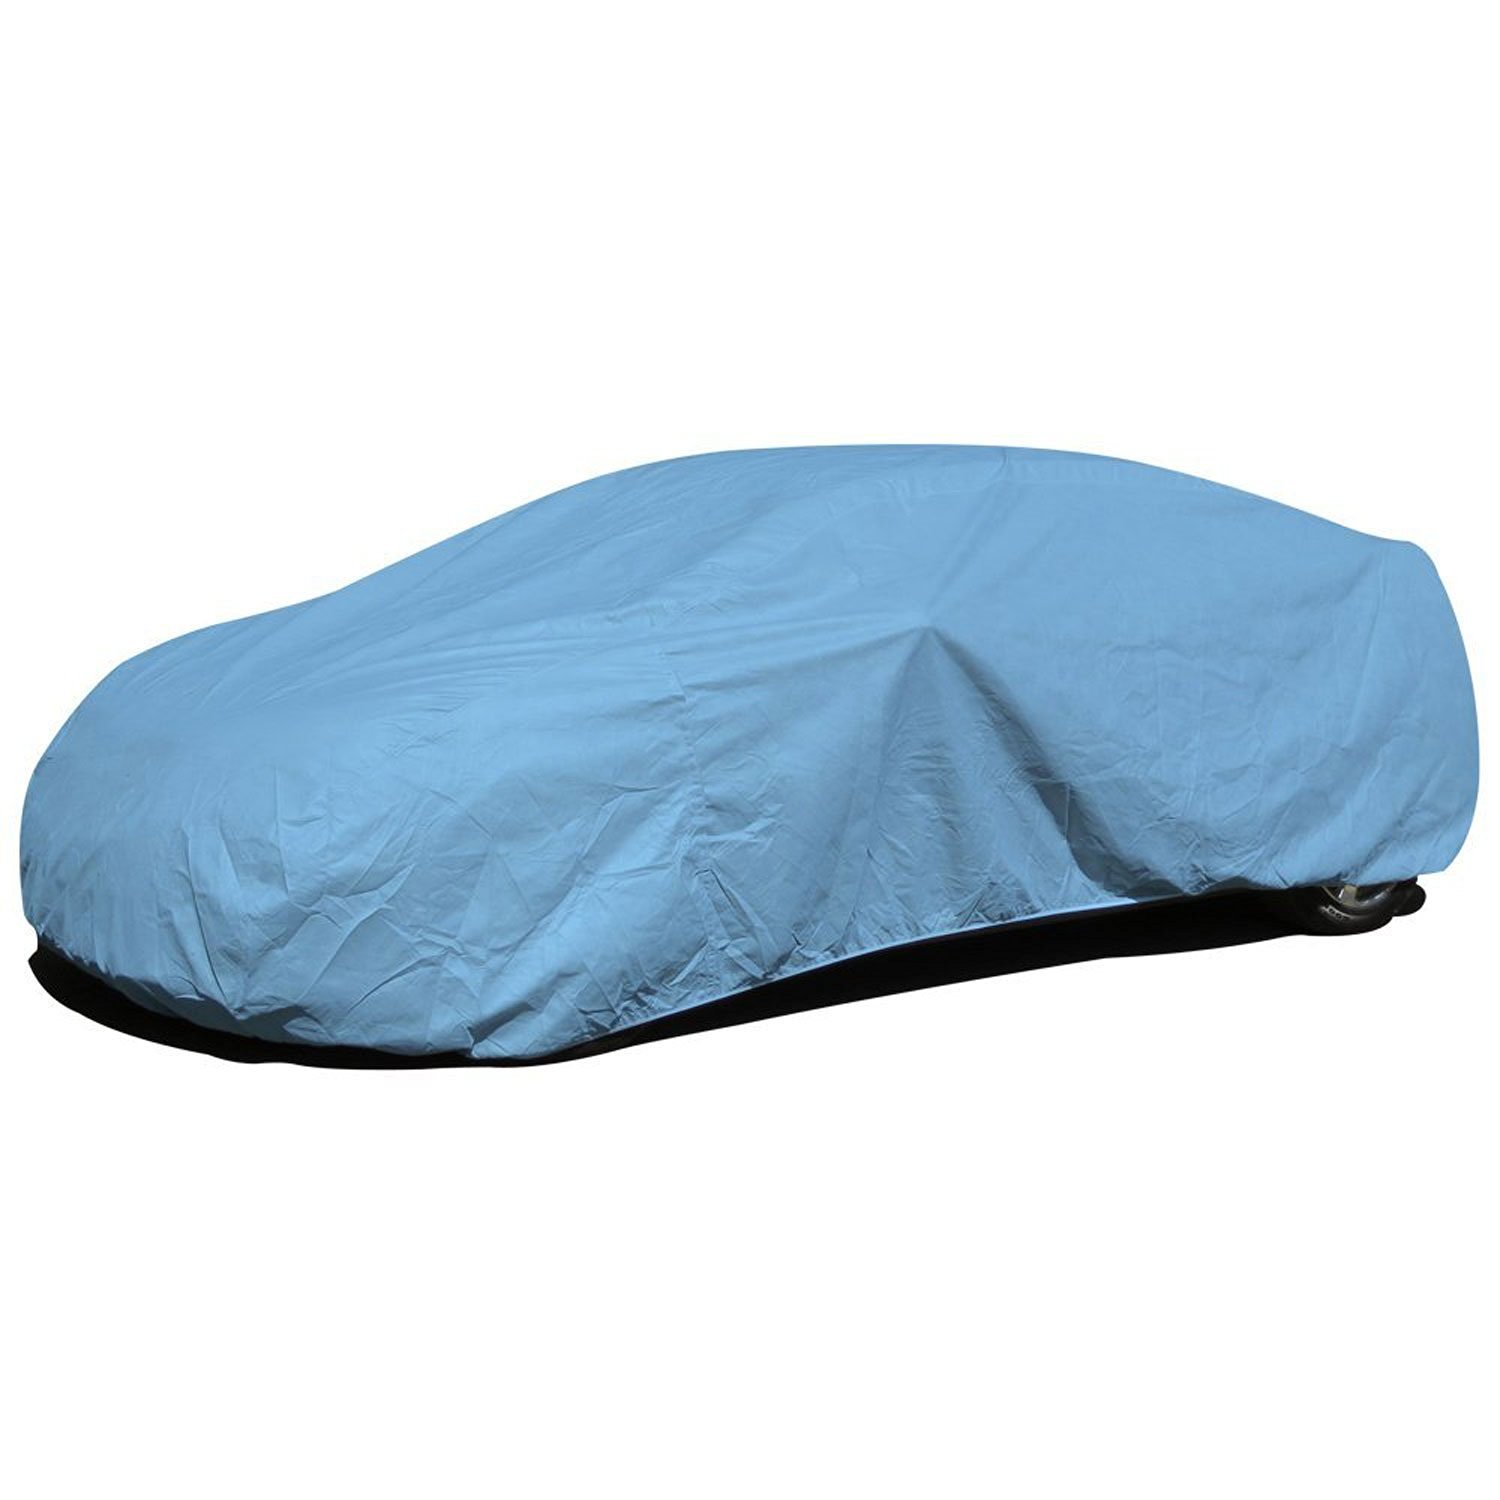 #7. Budge Duro Car Cover (200-inches)